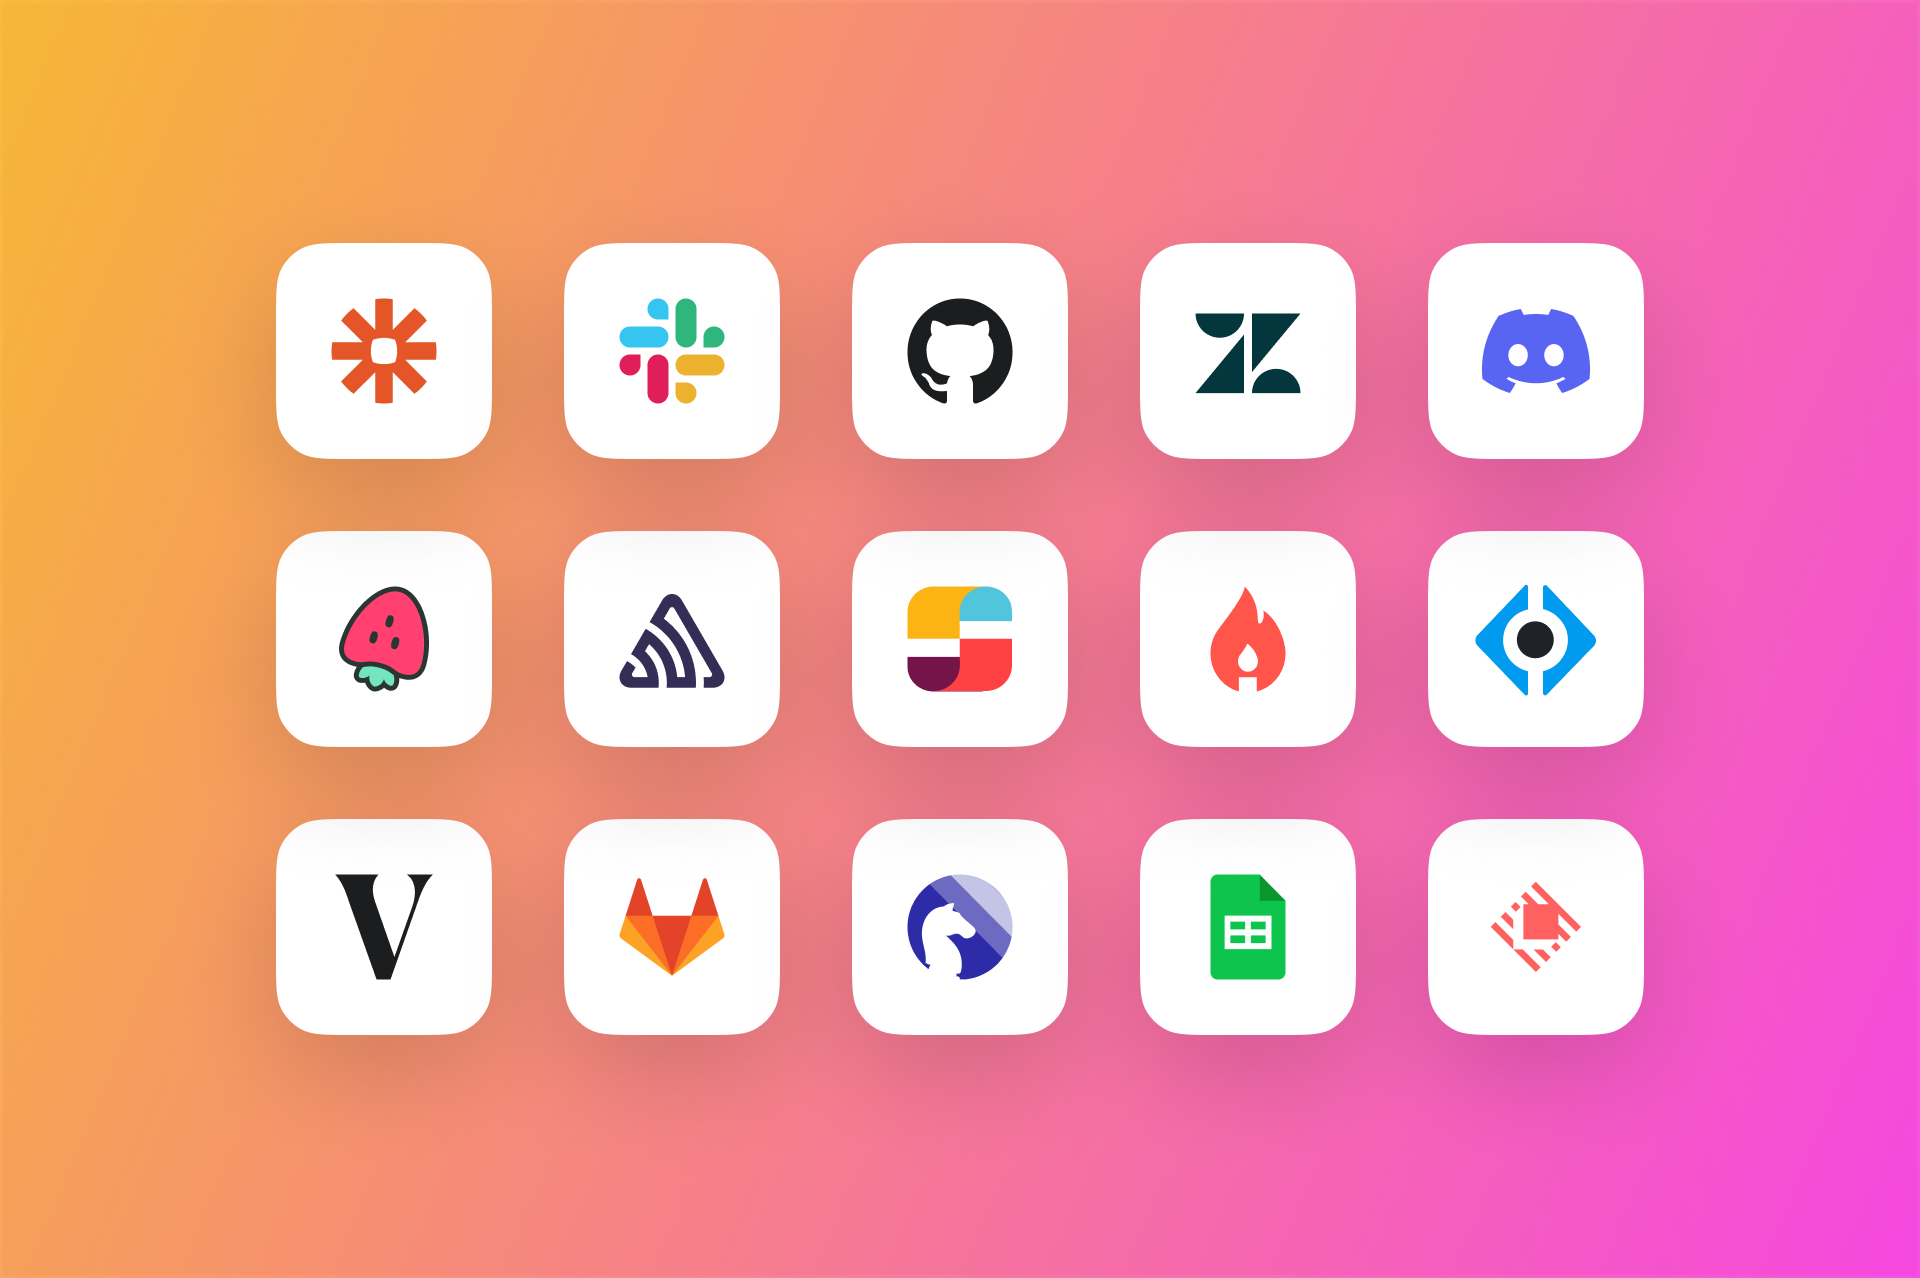 Grid of logos for products that Linear integrates with, including Slack, Zapier, GitHub, and Sentry.